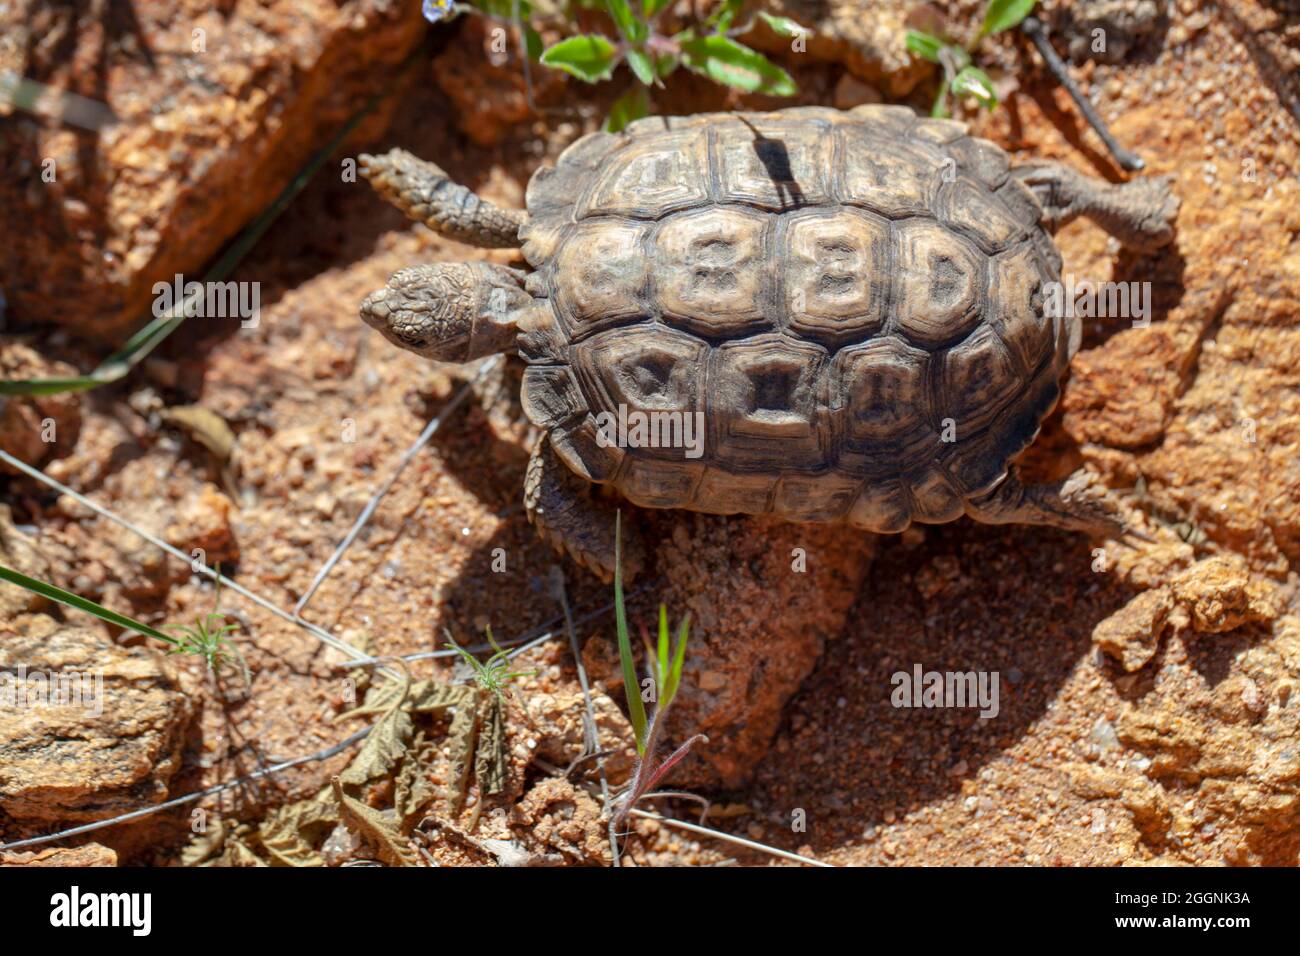 Speckled Cape Tortoise Stock Photo